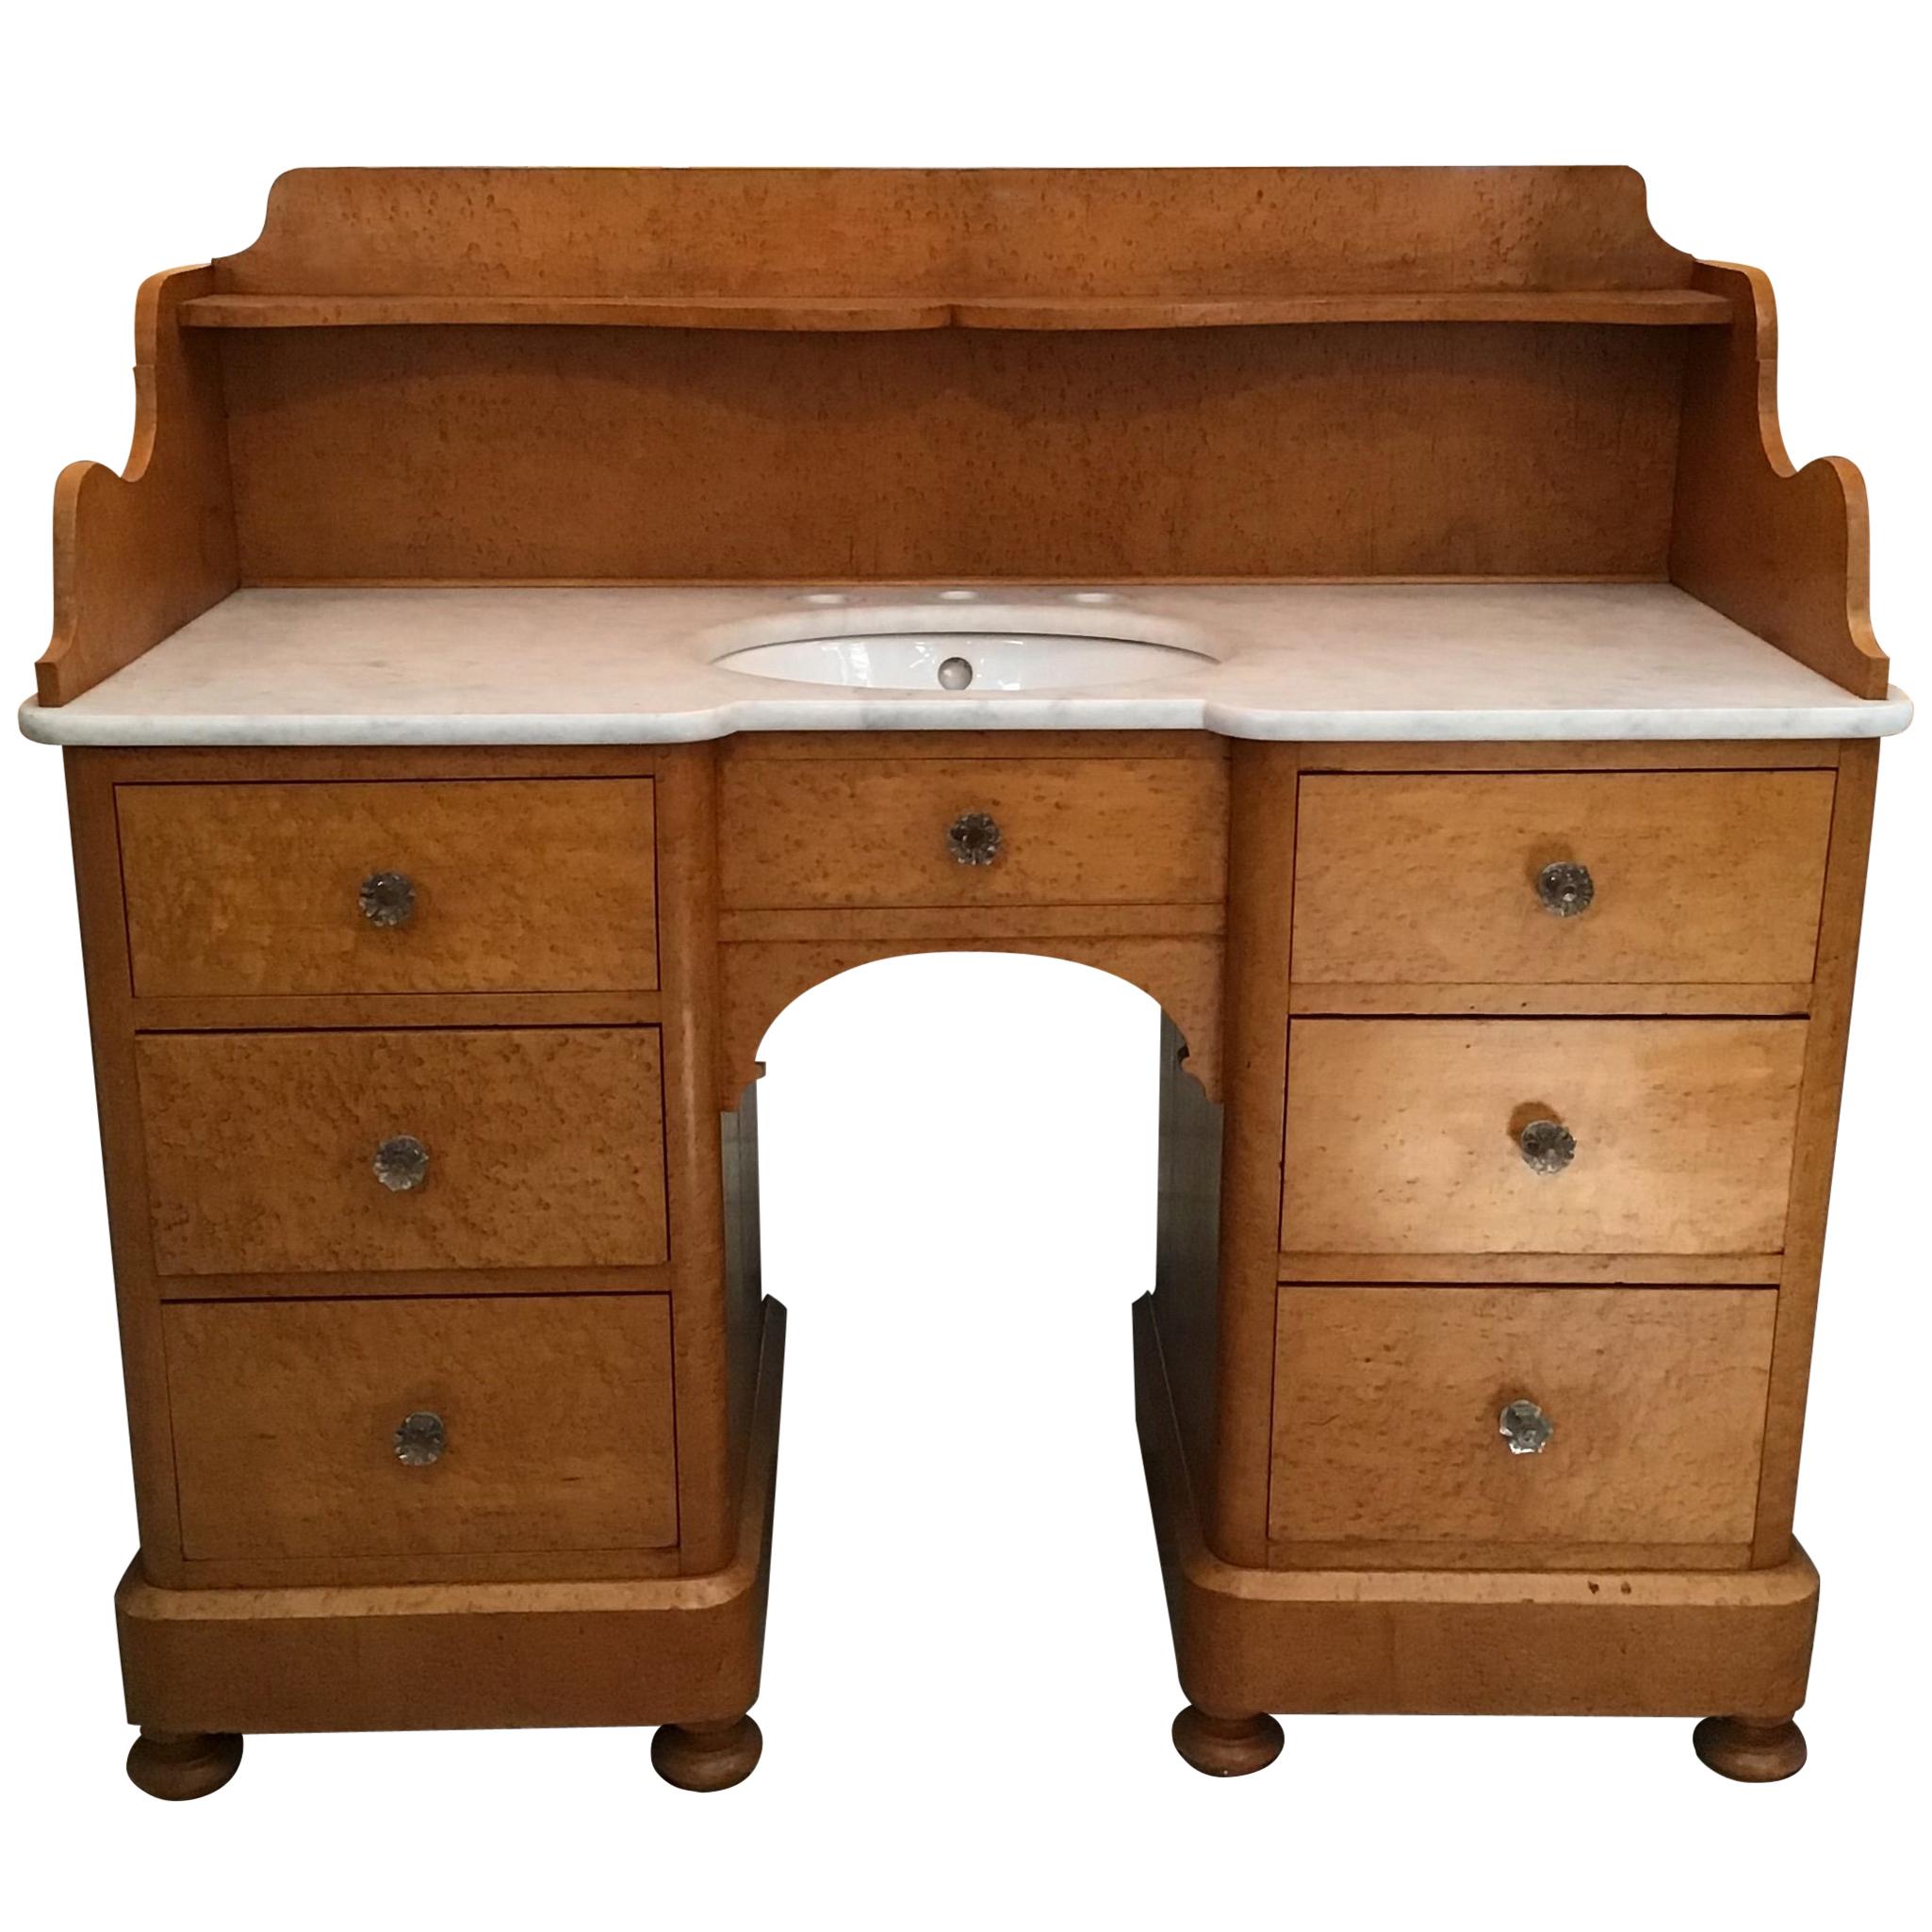 Pair of Italian brier-root veneer with Carrara marble wash stand cabinets from early 20th century
These sinks are equipped with six drawers and one shelf
The Carrara marble top is provided for a three holes faucet and comes with a porcelain